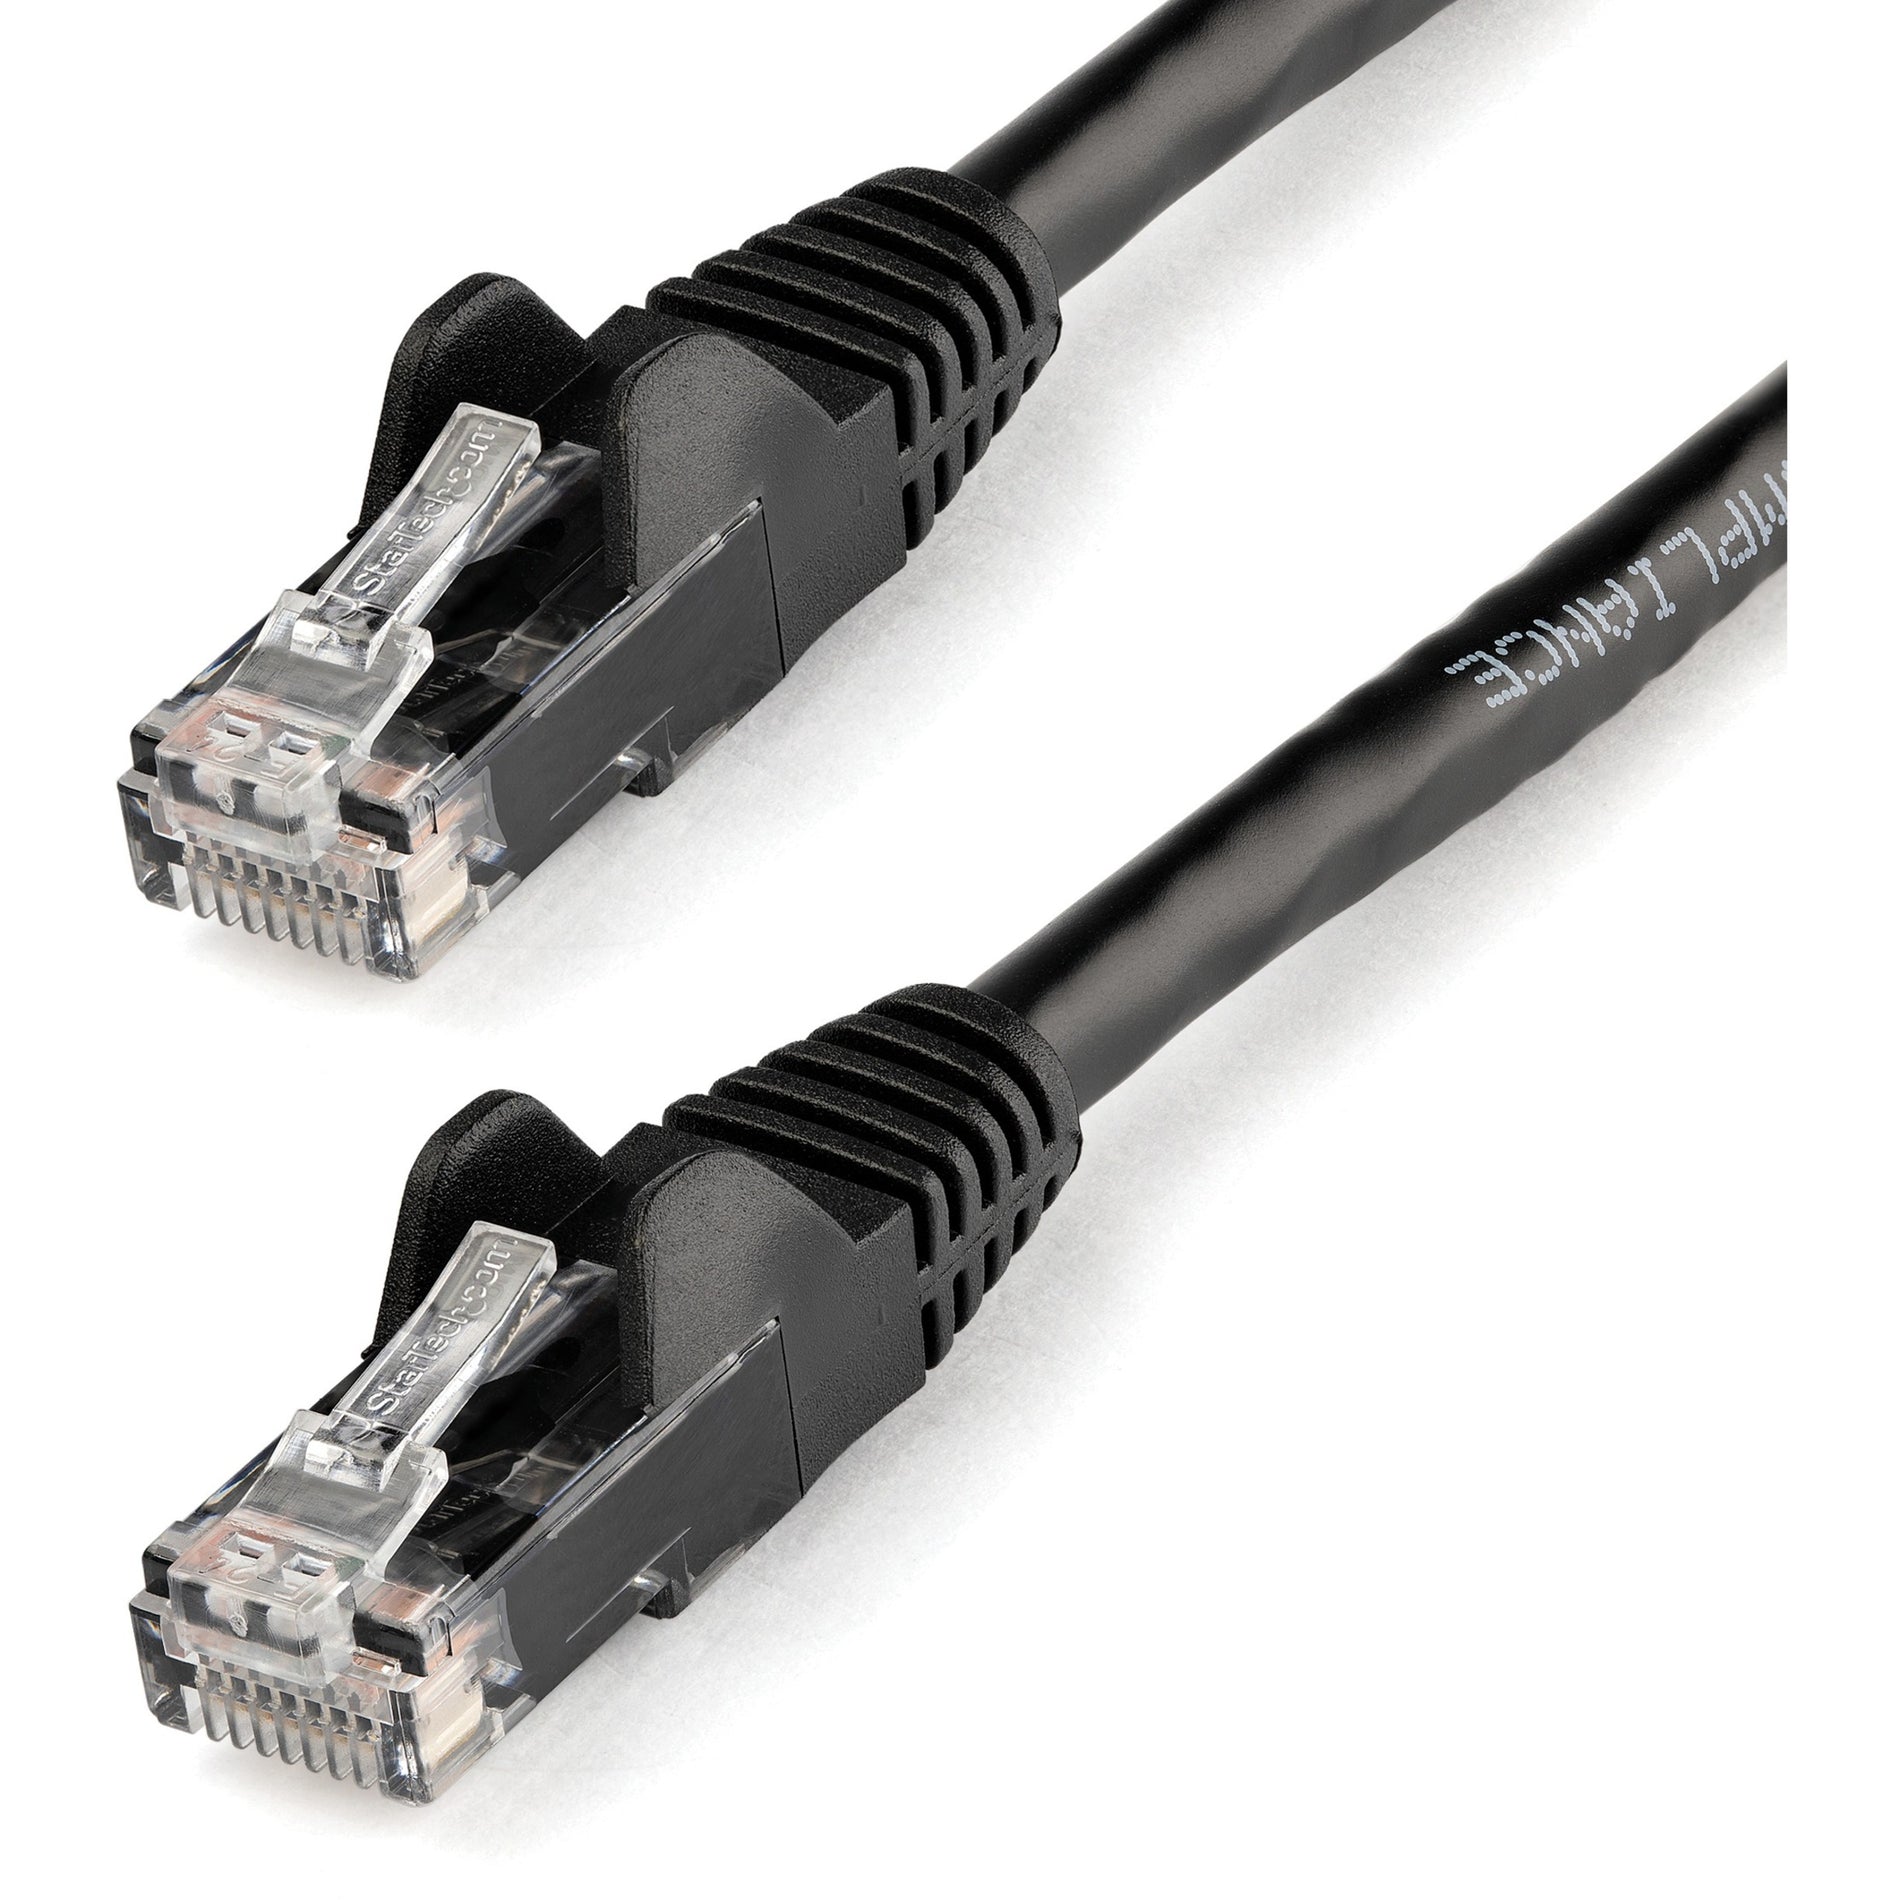 StarTech.com N6PATCH100BK 100 ft Black Snagless Cat6 UTP Patch Cable, PoE, 10 Gbit/s Data Transfer Rate